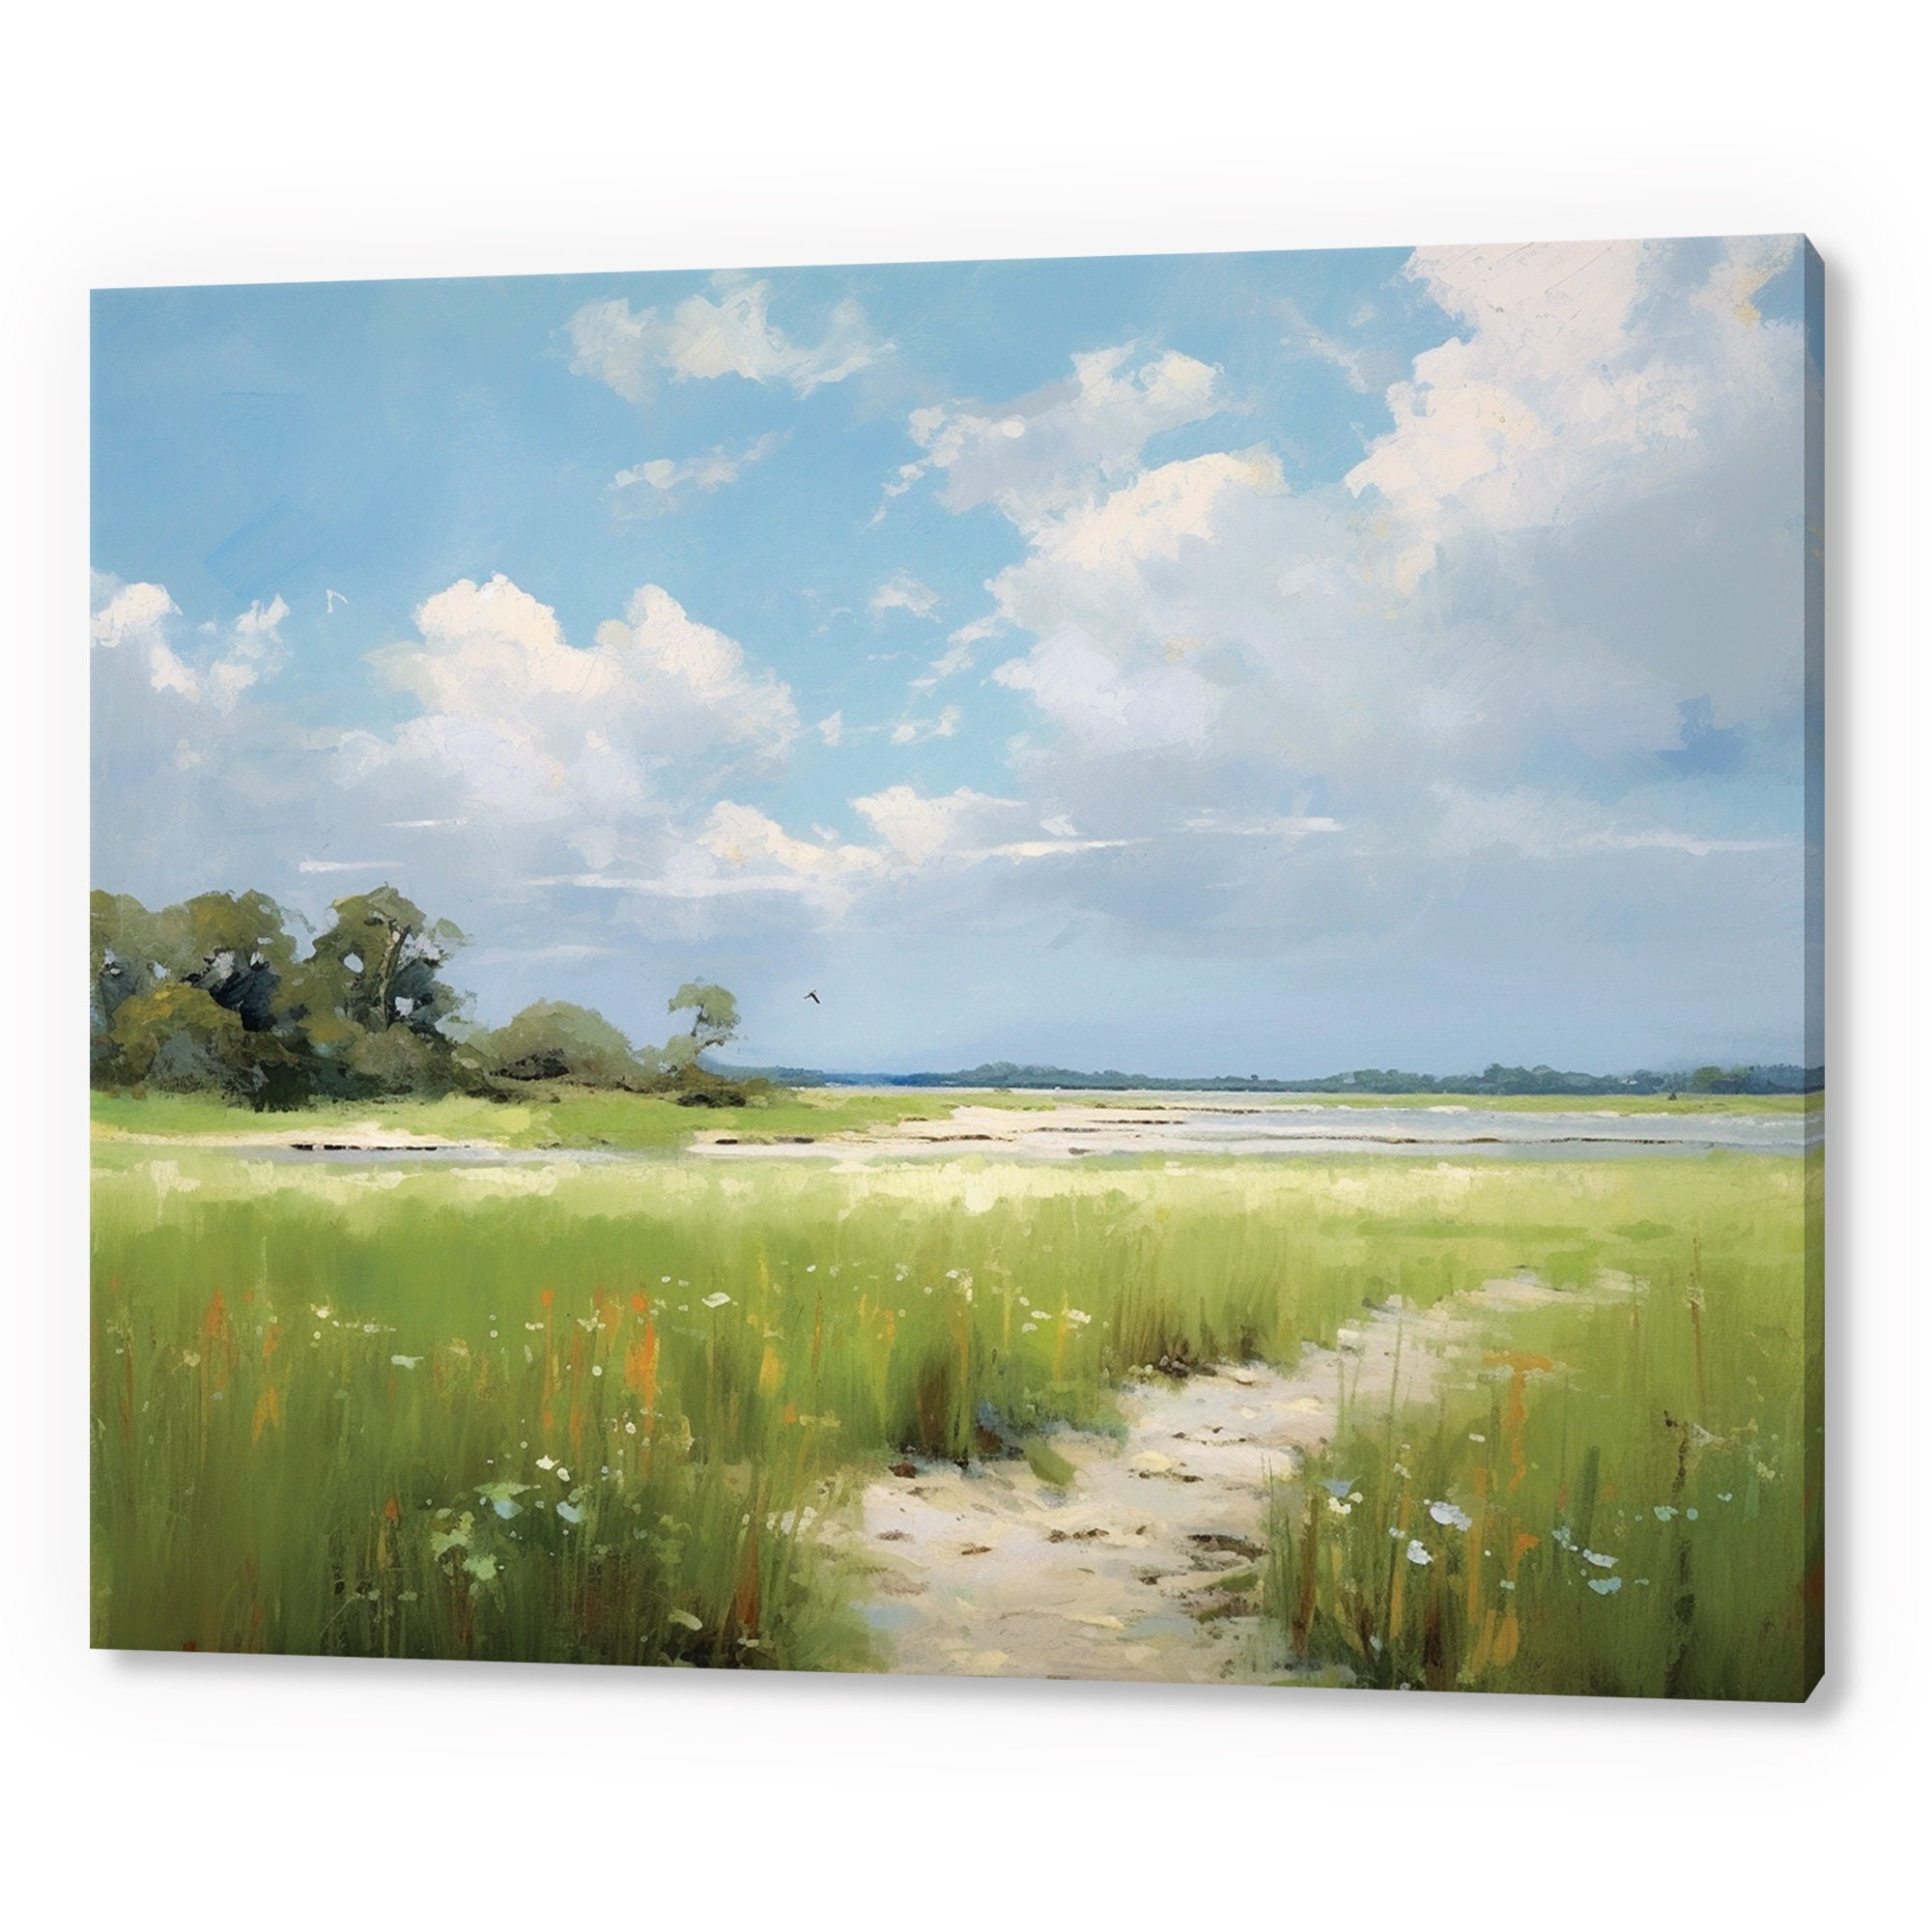 WATERCOLOR CANVAS PRINTS Any 8x10 or 11x14 Canvas Print